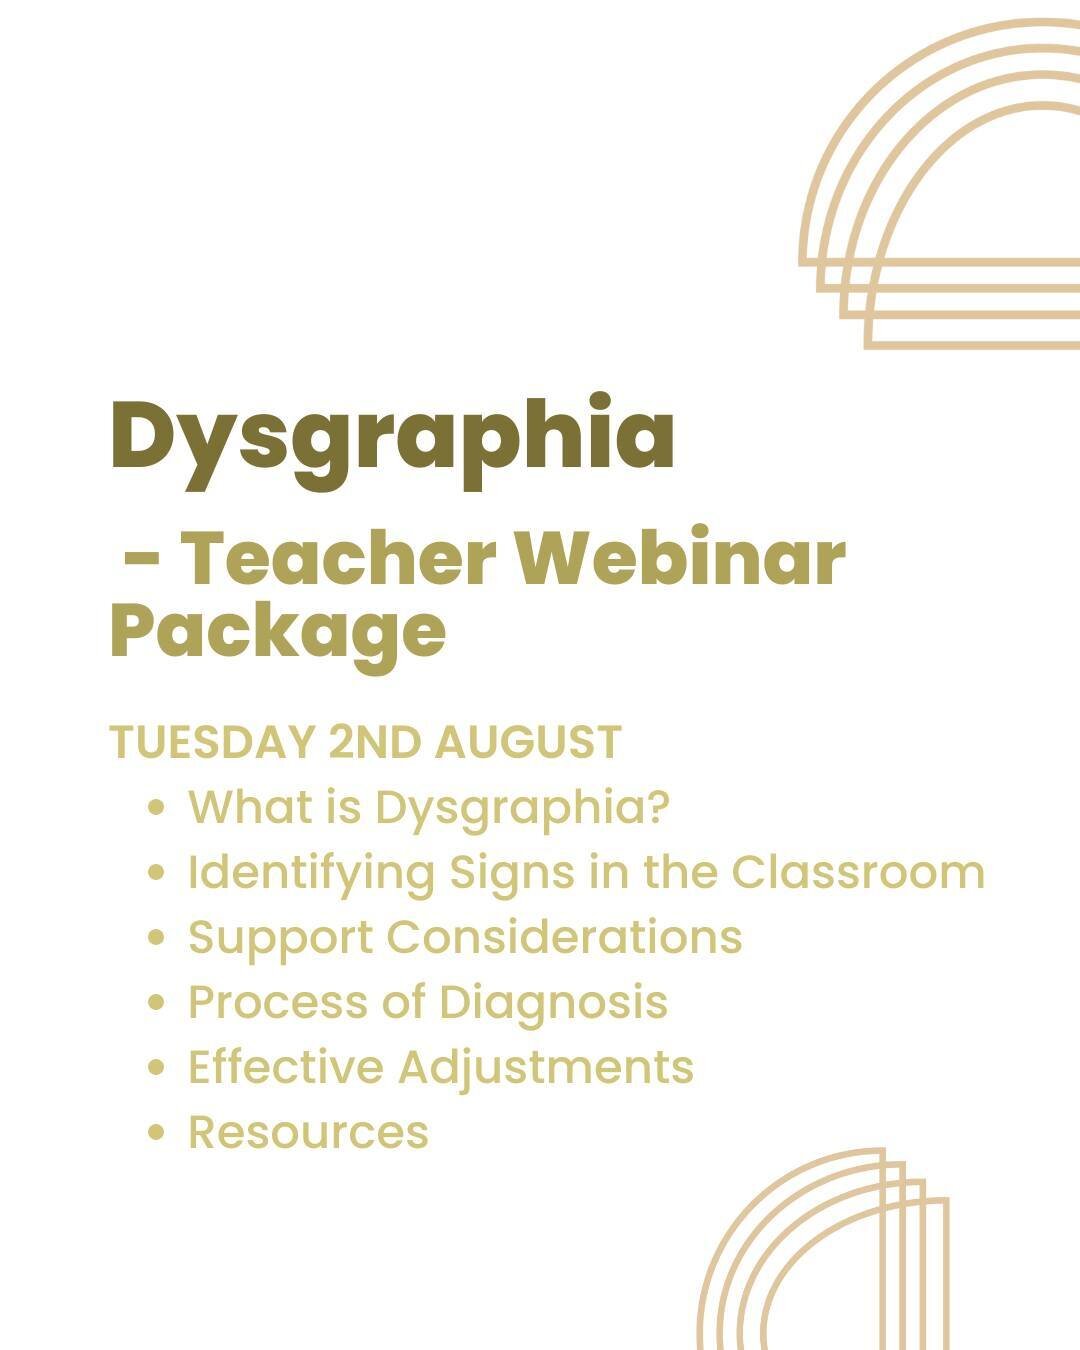 Dysgraphia - Teacher Webinar Package $53.99

Packages includes:
- Unlimited and Immediate Access to 1.5 Hour Webinar Recording
- Printable Presentation Slides
- Processing Disorders Effective Adjustments and Accommodations eBook
- Certificate of Atte